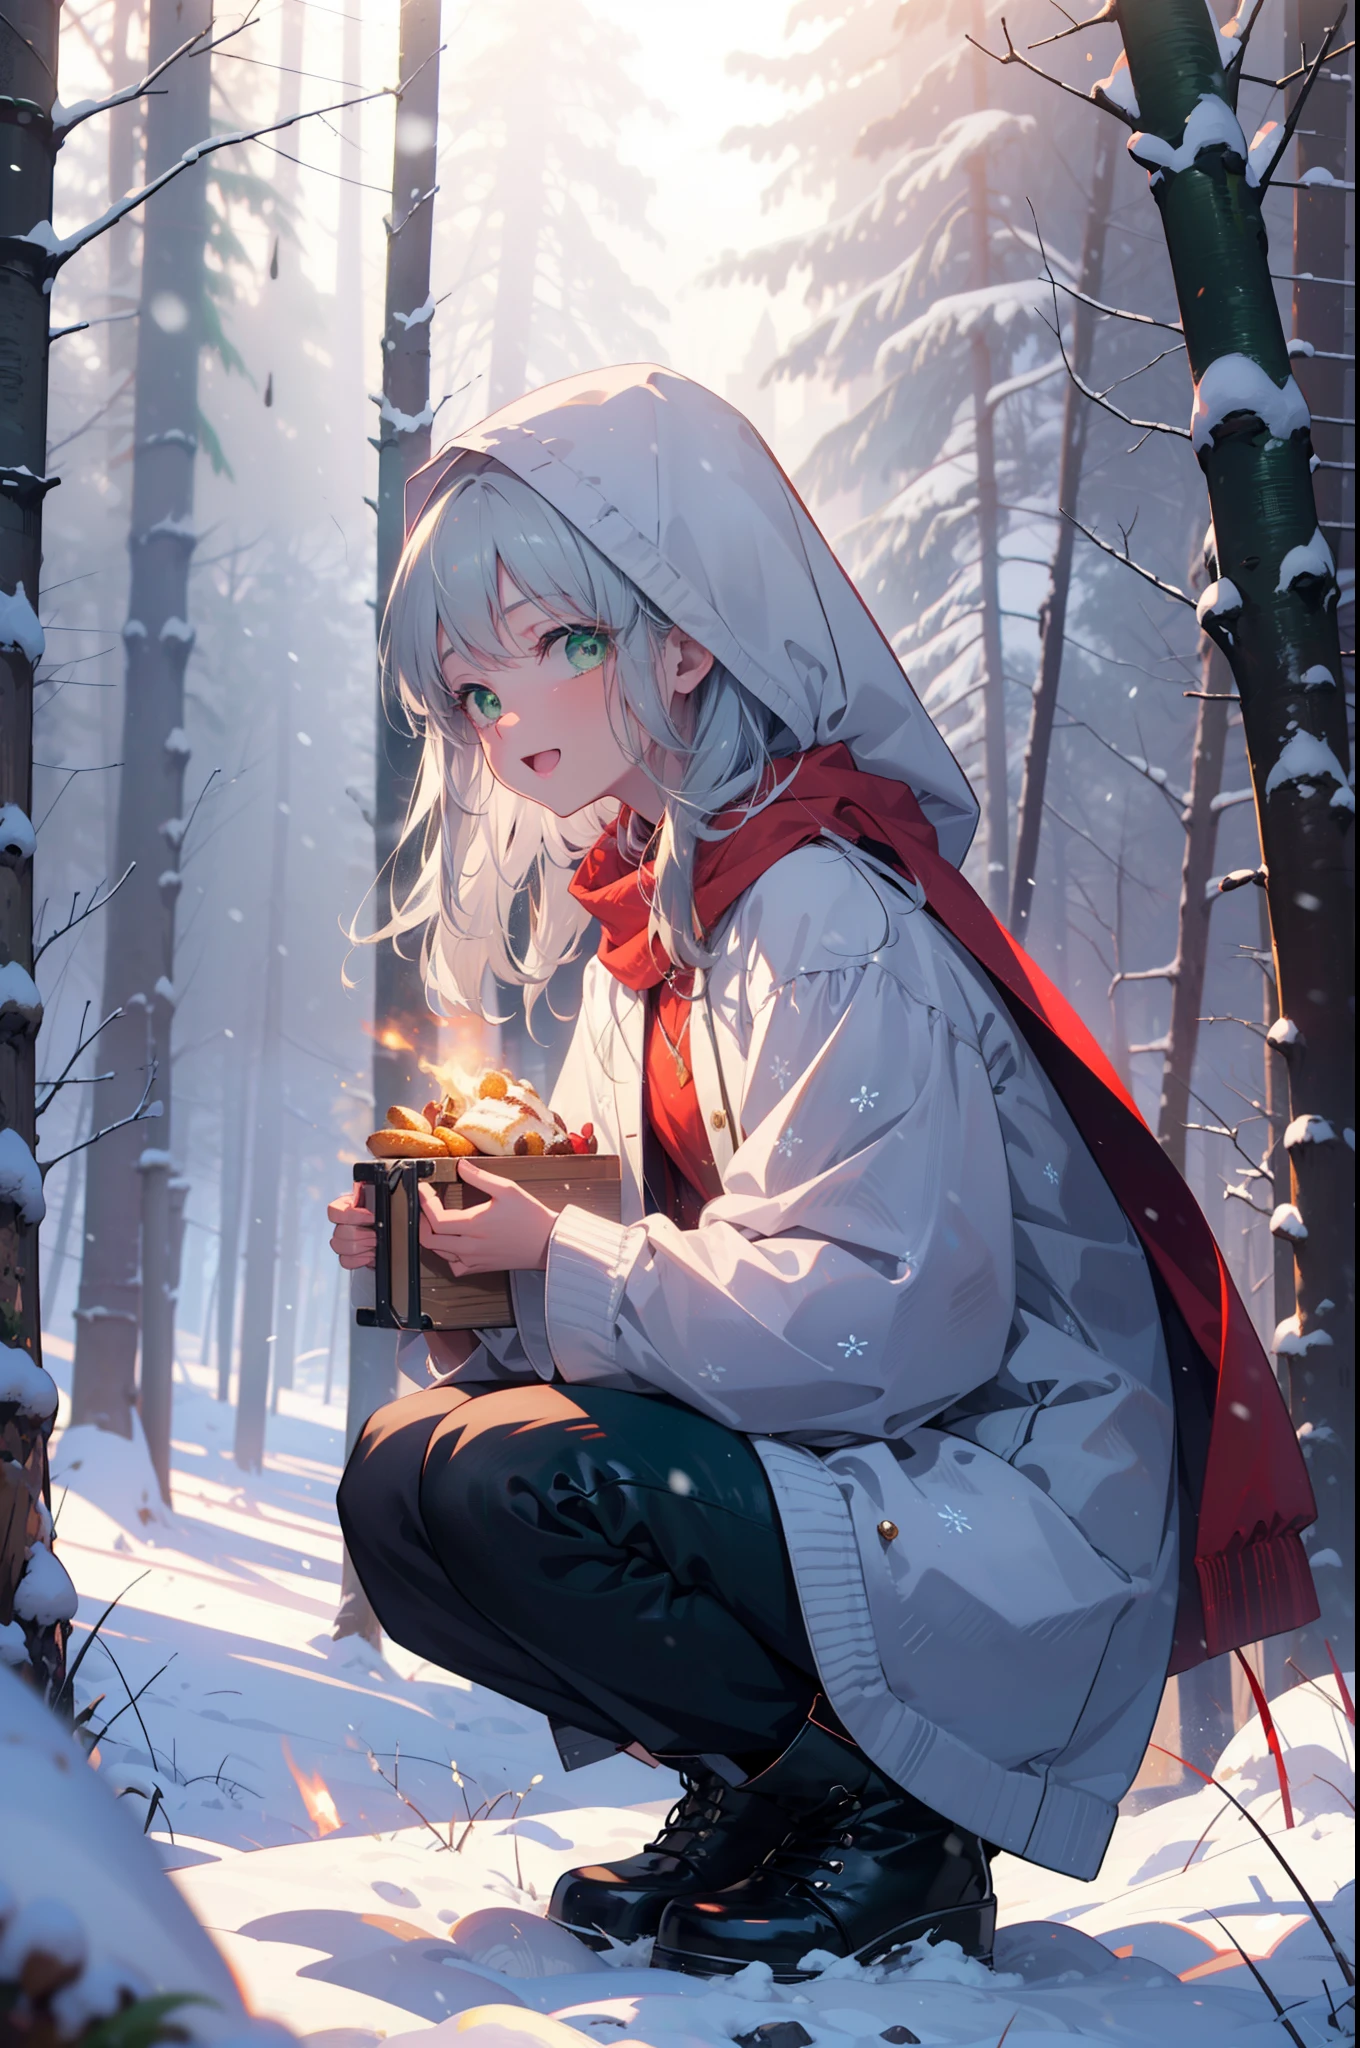 index, index, (Green Eyes:1.5), Silver Hair, Long Hair, (Flat Chest:1.2),happy smile, smile, Open your mouth,
Open your mouth,snow, fire, Outdoor, boots, snowing, From the side, wood, suitcase, Cape, Blurred, Food Up, forest, White handbag, nature,  Squat, Mouth closed, フードed Cape, winter, Written boundary depth, Black shoes, red Cape break looking at viewer, Upper Body, whole body, break Outdoor, forest, nature, break (masterpiece:1.2), highest quality, High resolution, unity 8k wallpaper, (shape:0.8), (Beautiful and beautiful eyes:1.6), Highly detailed face, Perfect lighting, Highly detailed CG, (Perfect hands, Perfect Anatomy),